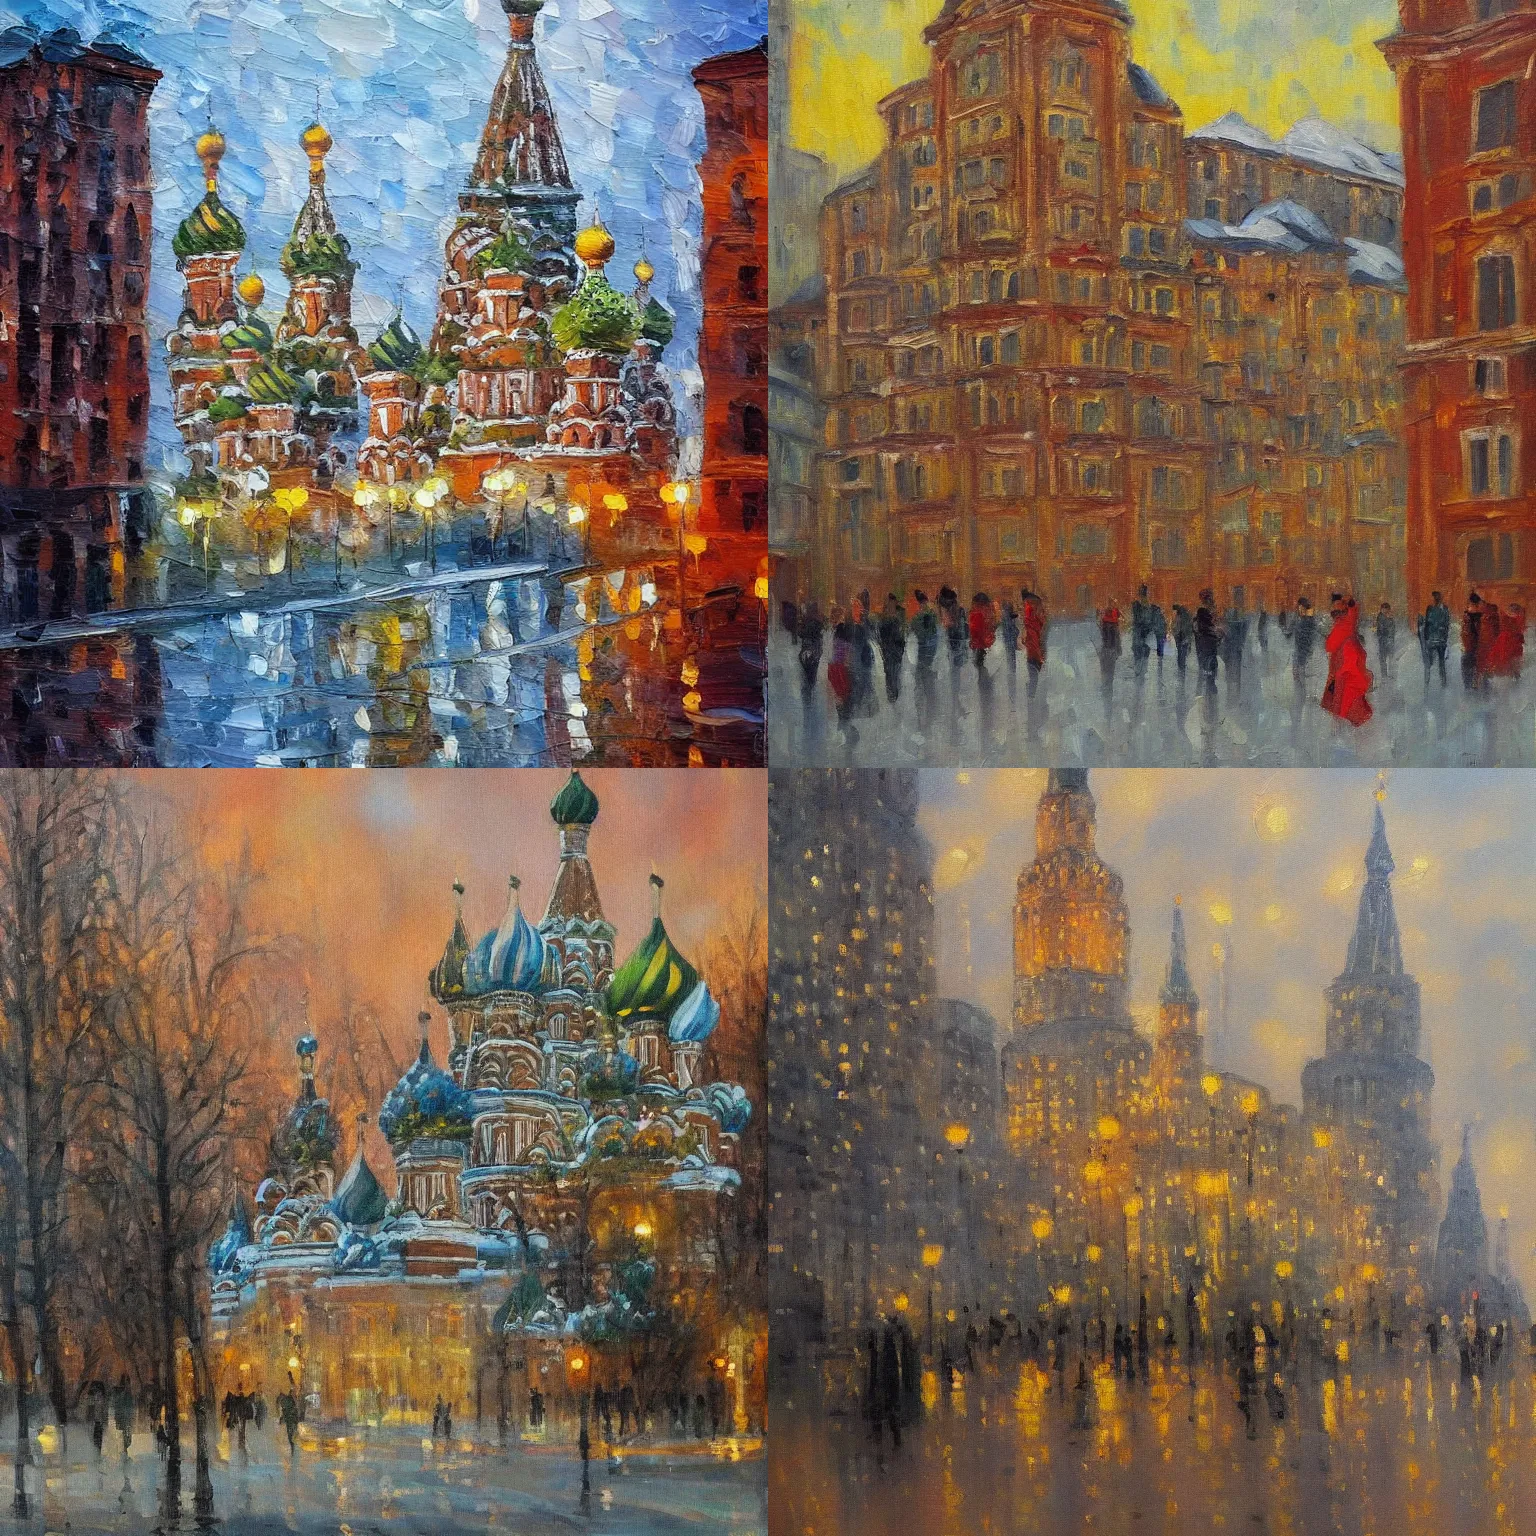 Prompt: an oil painting of Russian building in style of impressionism